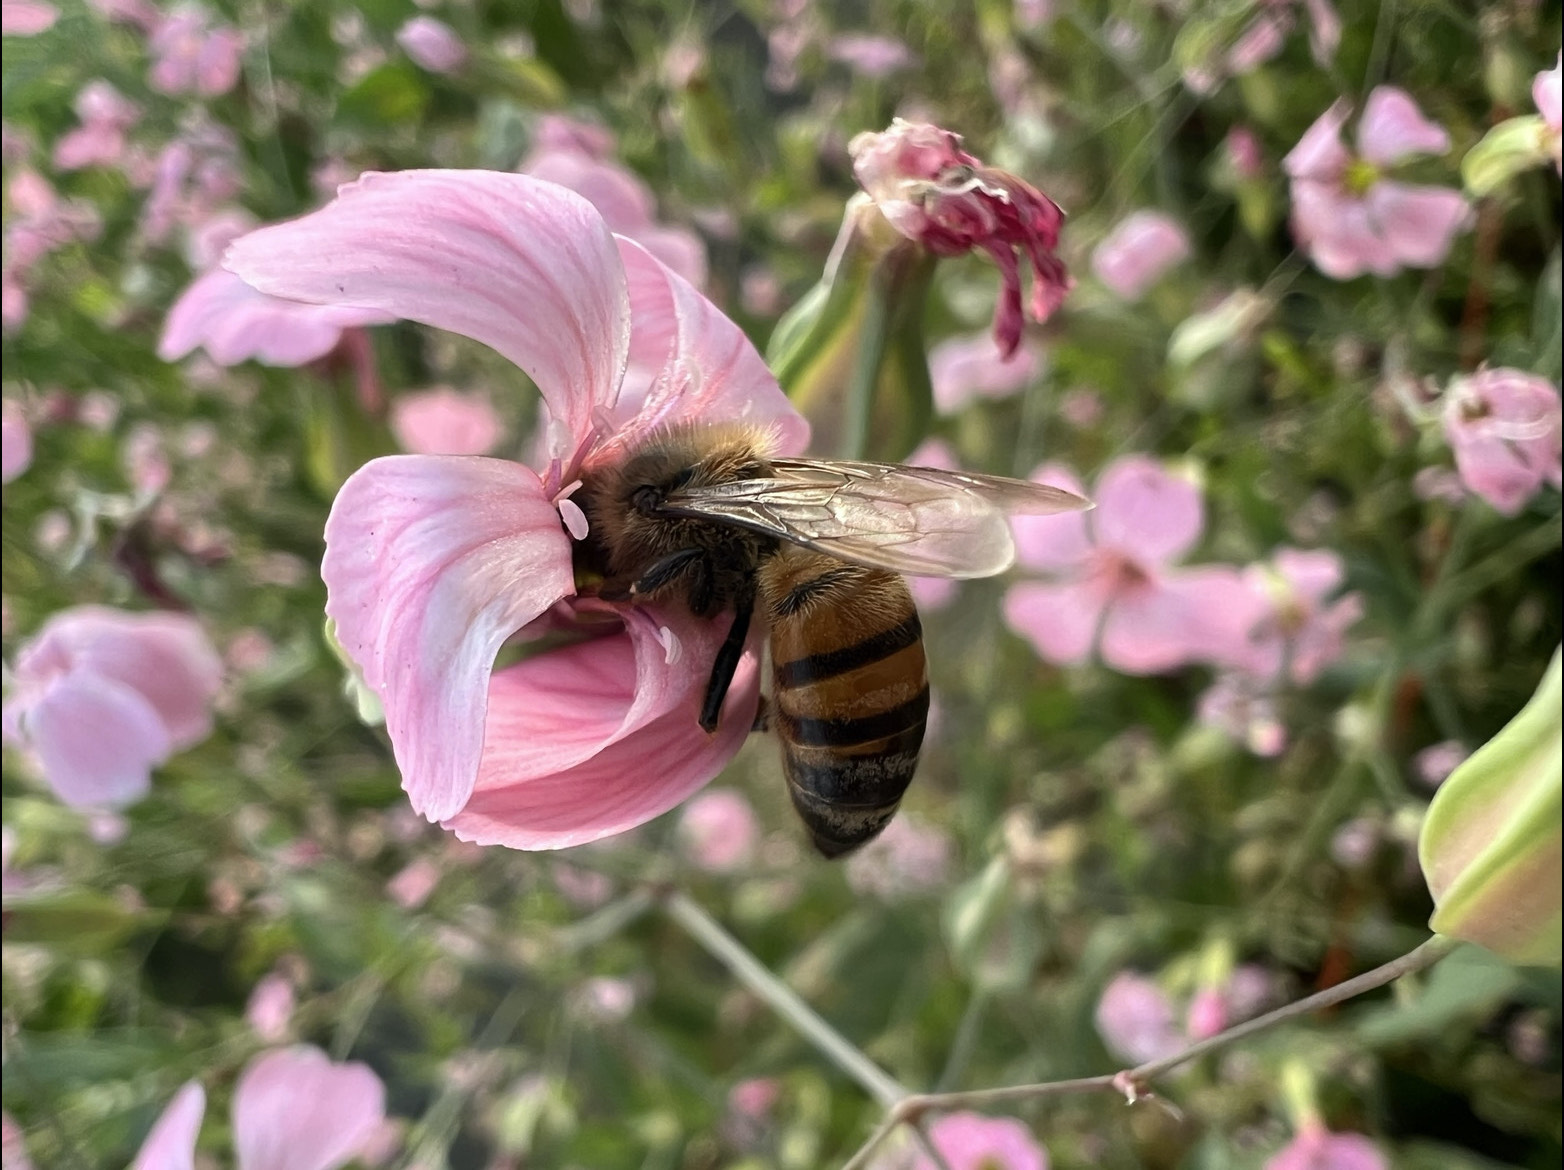 Flowering plants to attract pollinators:  Pollination syndromes